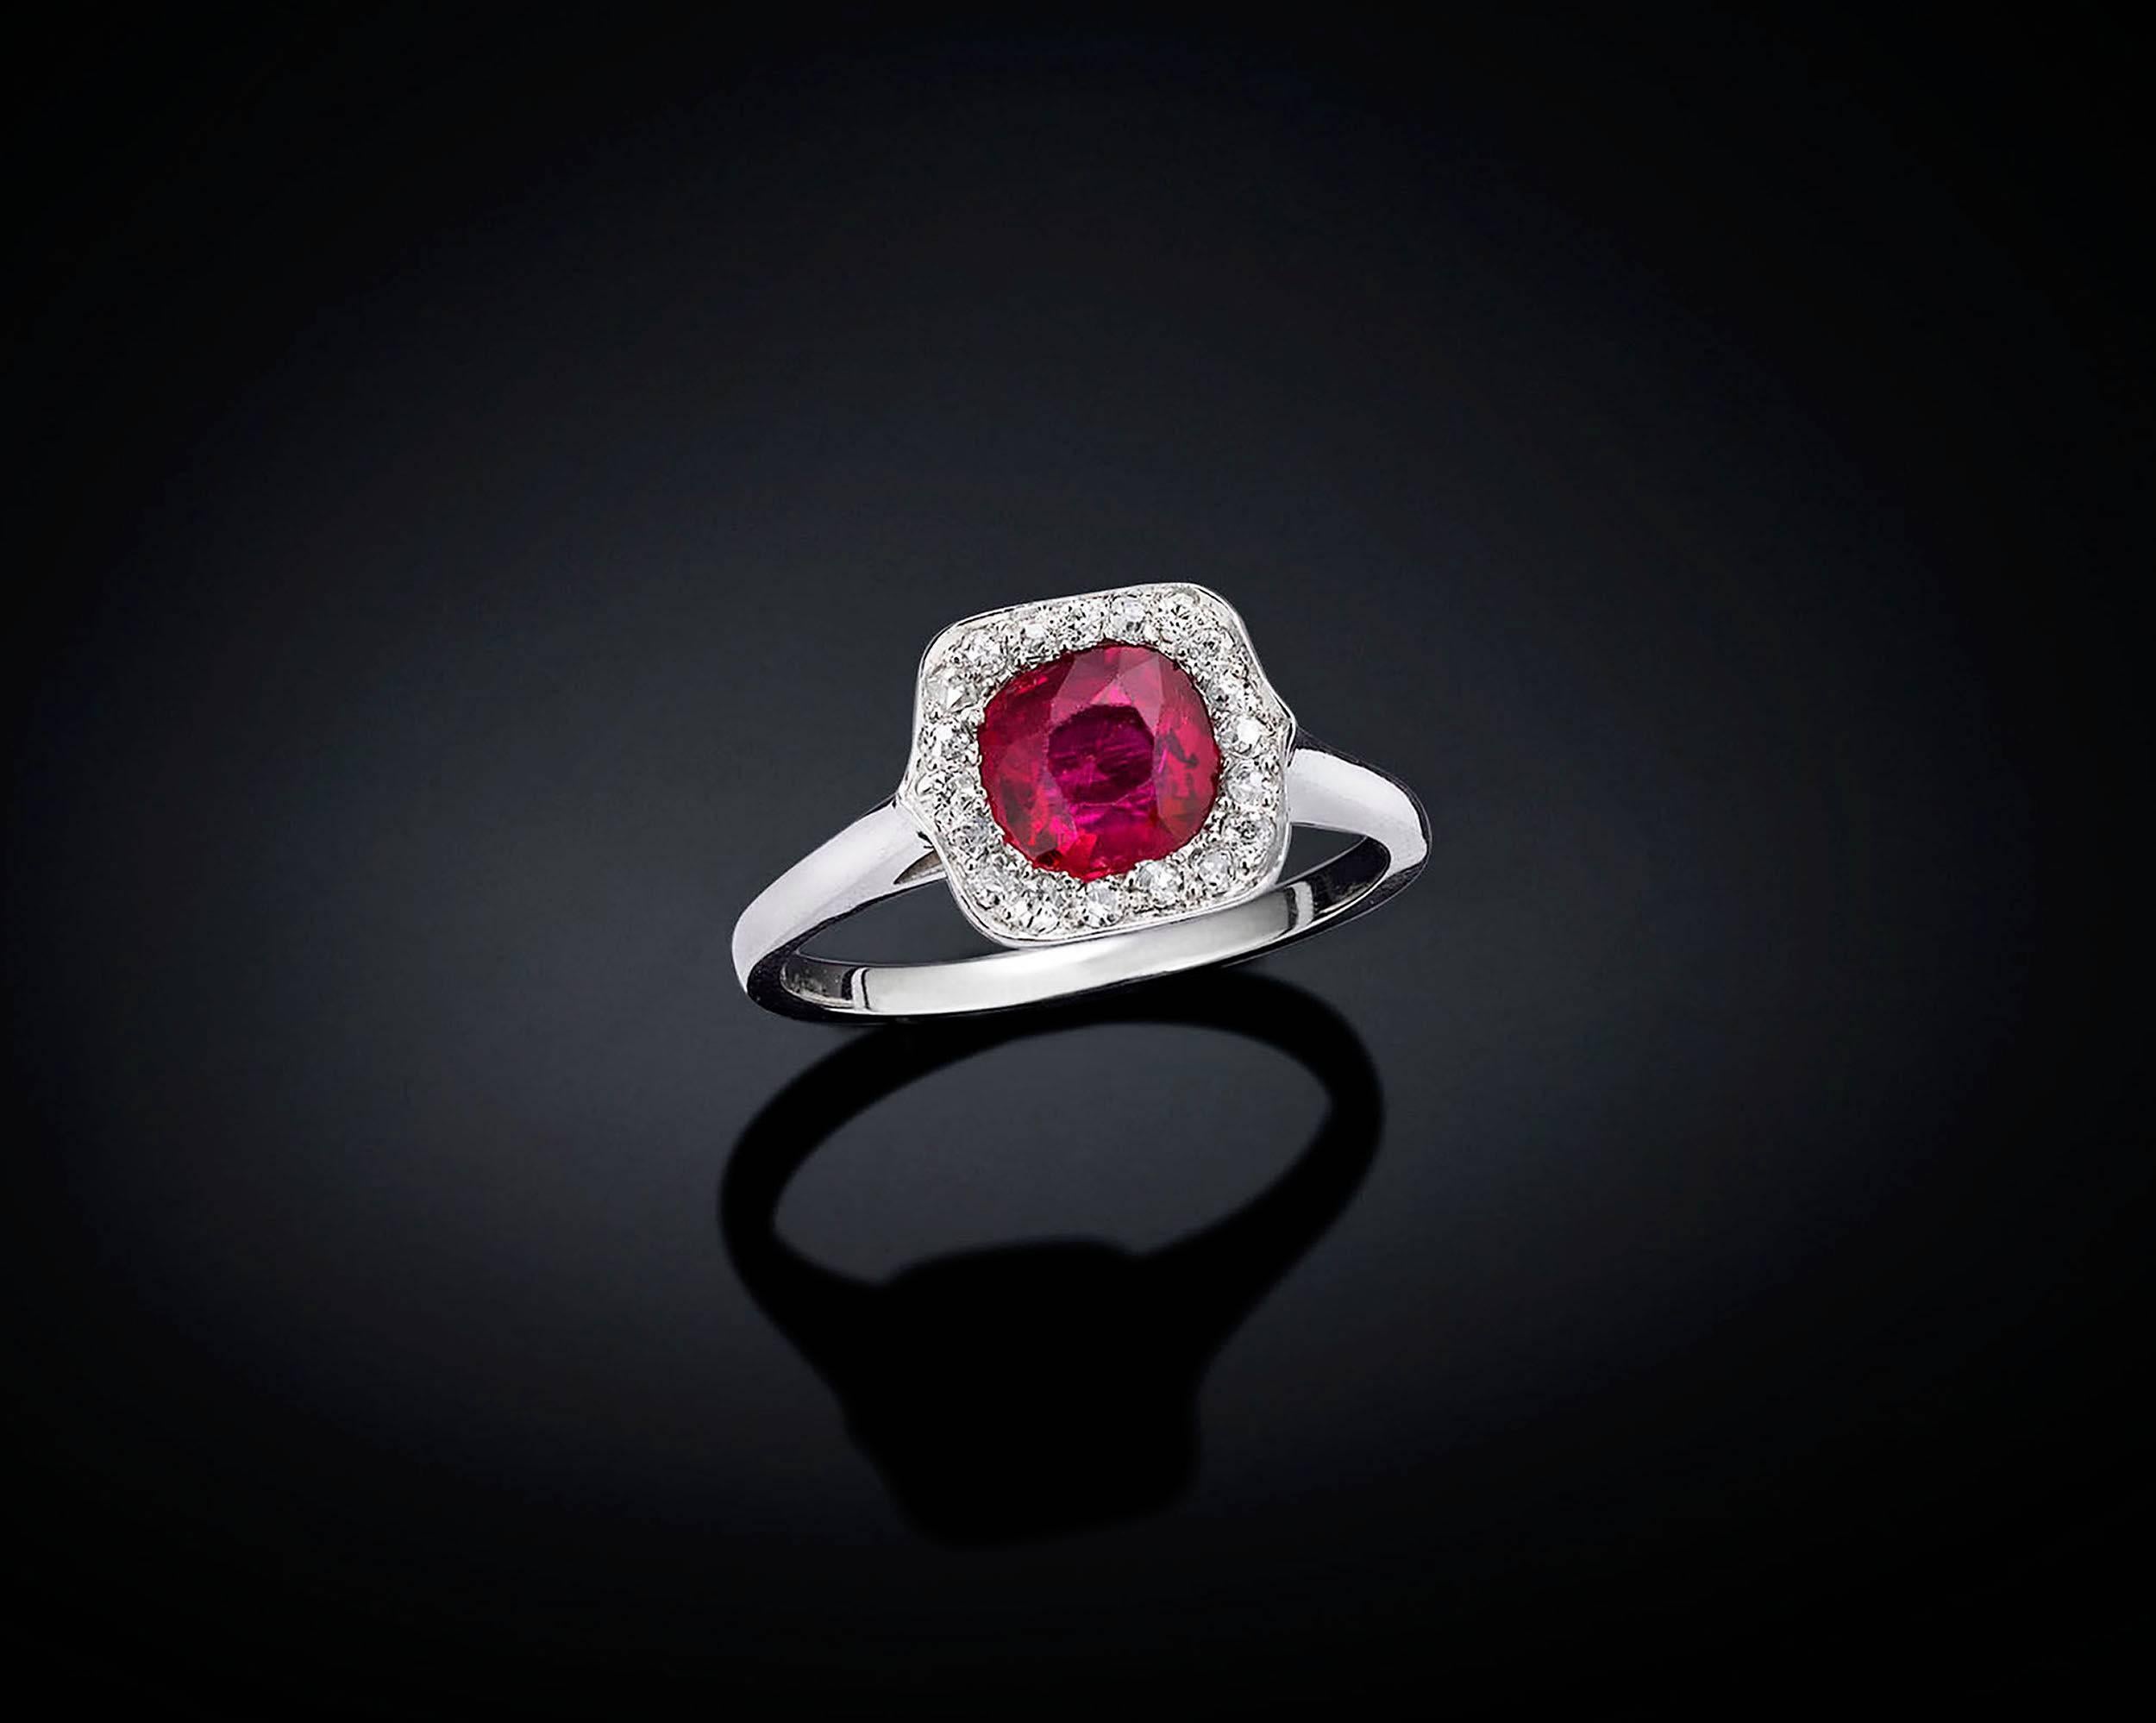 A lovely .81-carat untreated Burma ruby displays wonderful color in this stylish ring. Approximately .21 carats of white diamonds surround this crimson gem. The ruby is certified by the American Gemological Laboratories (AGL) to be of Burmese origin